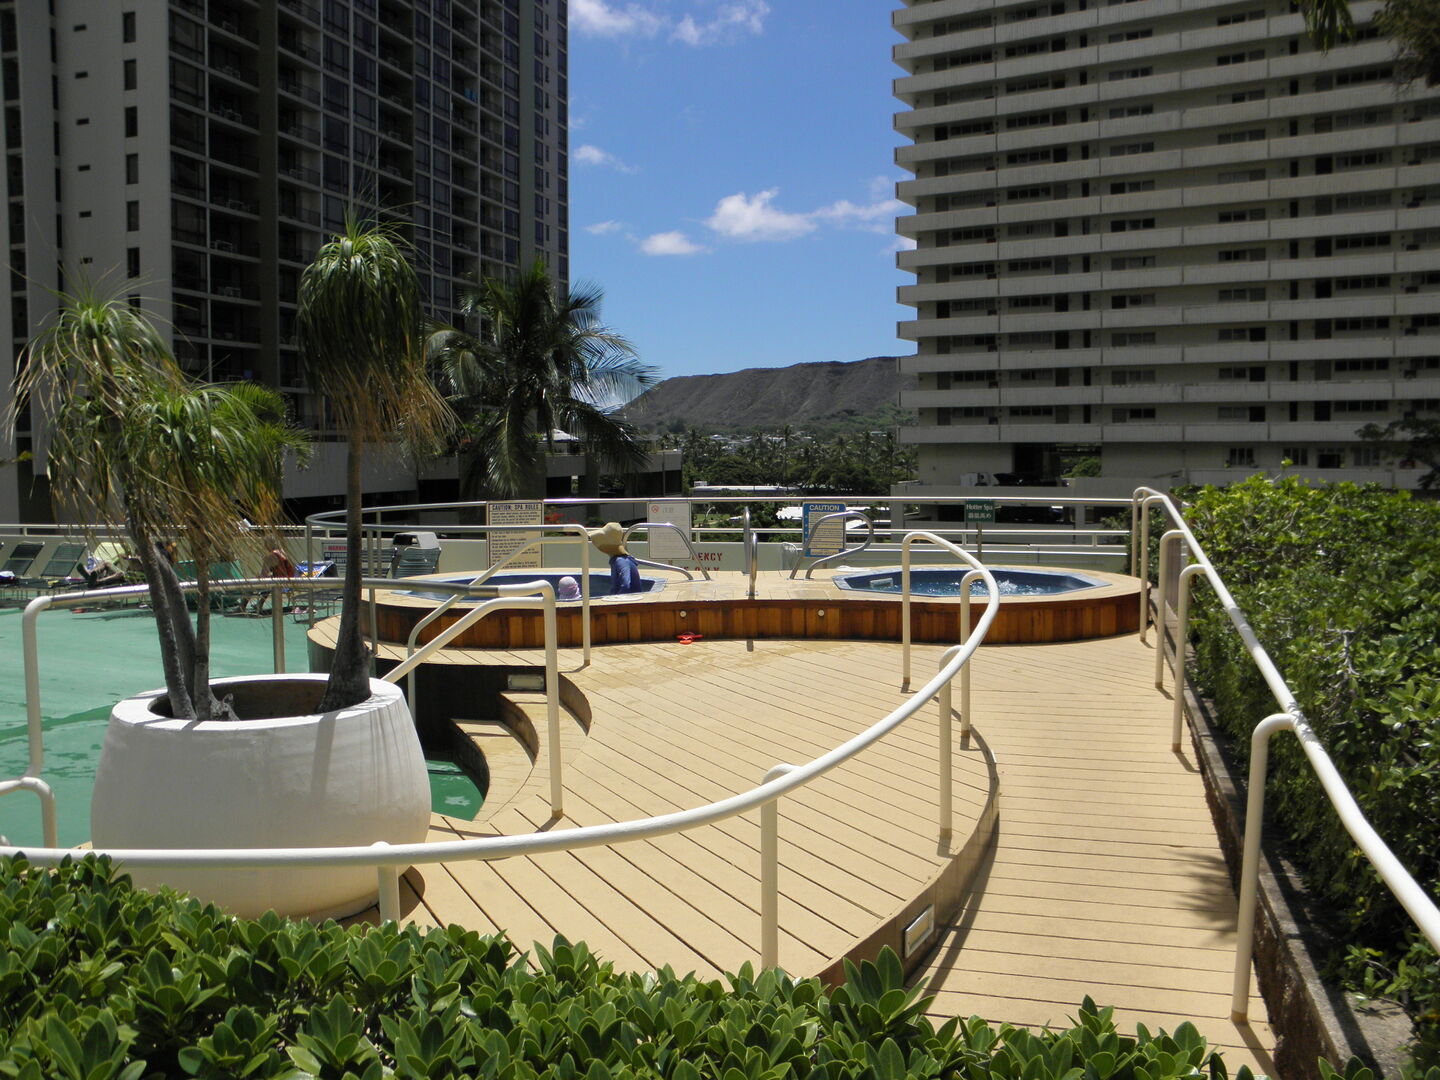 Hot tub on the recreation deck